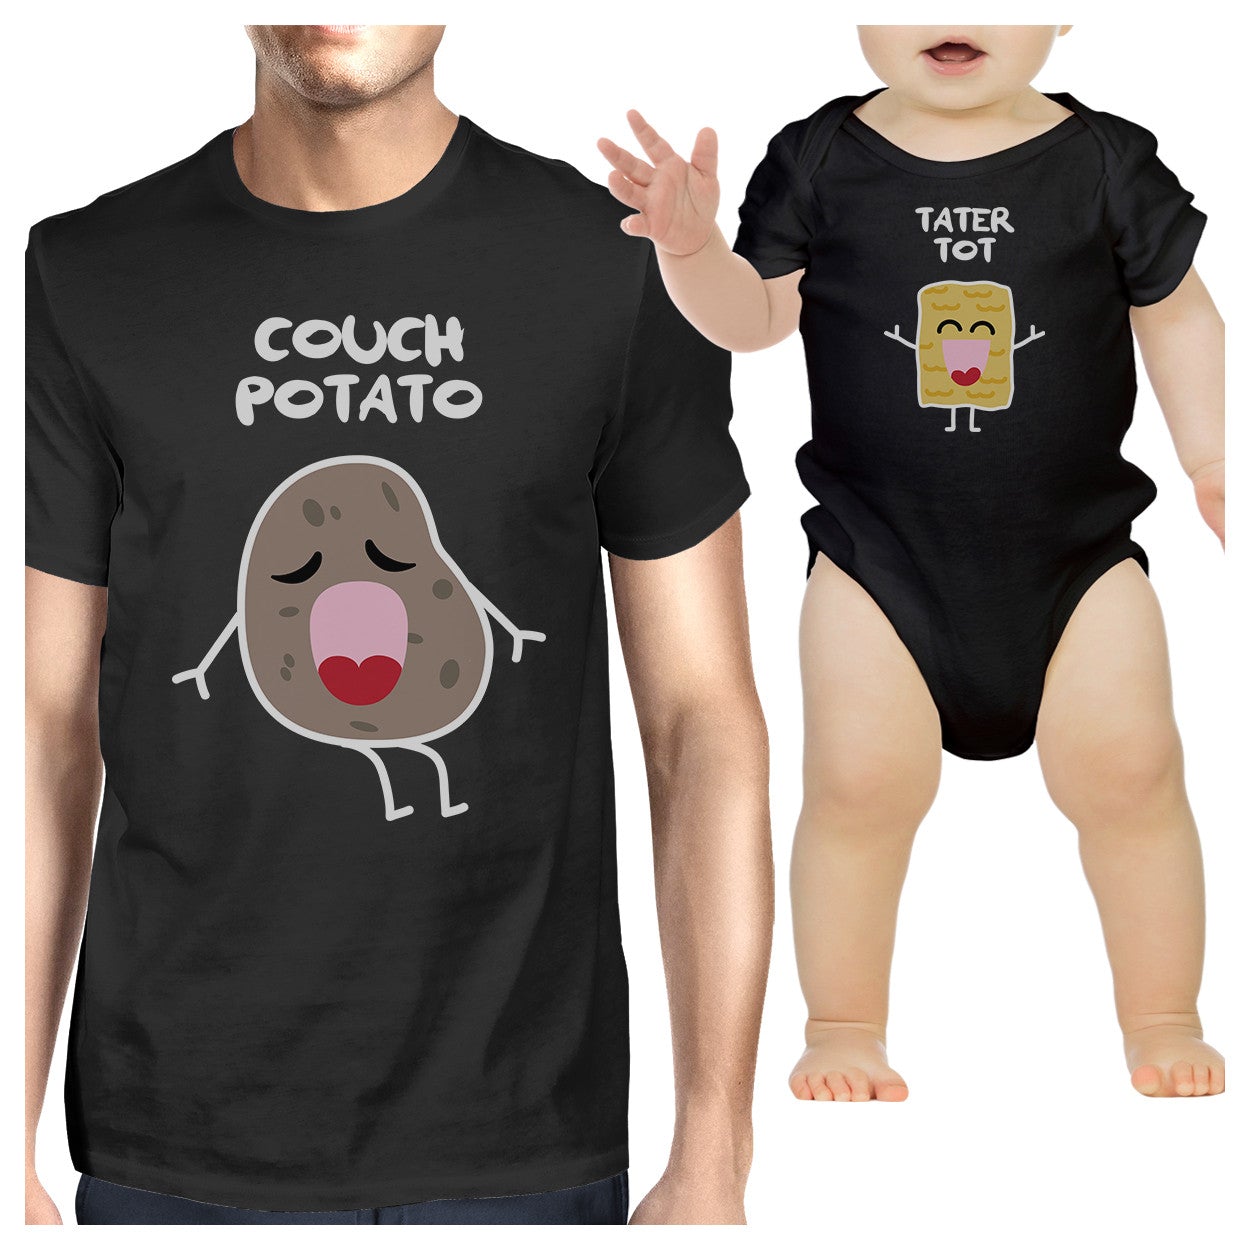 Couch Potato Tater Tot Dad and Baby Matching Black Shirts